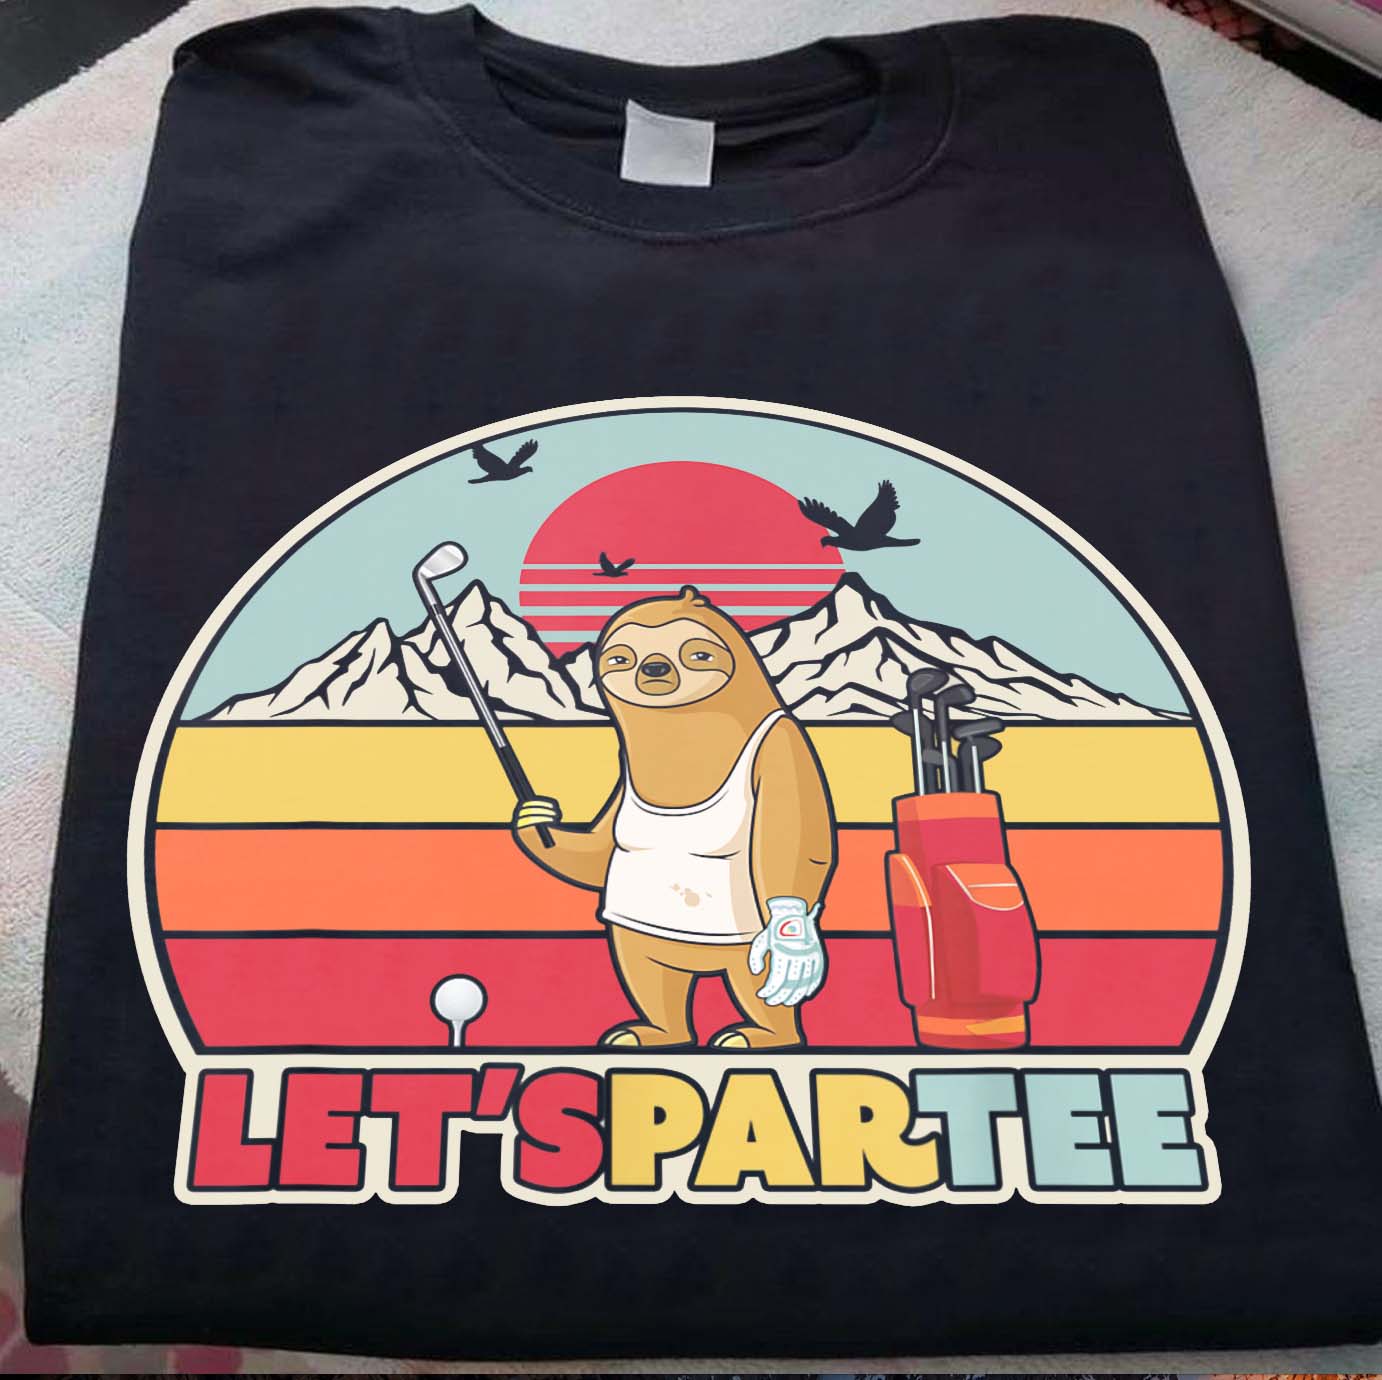 Let's partee - Sloth playing golf, sloth lover